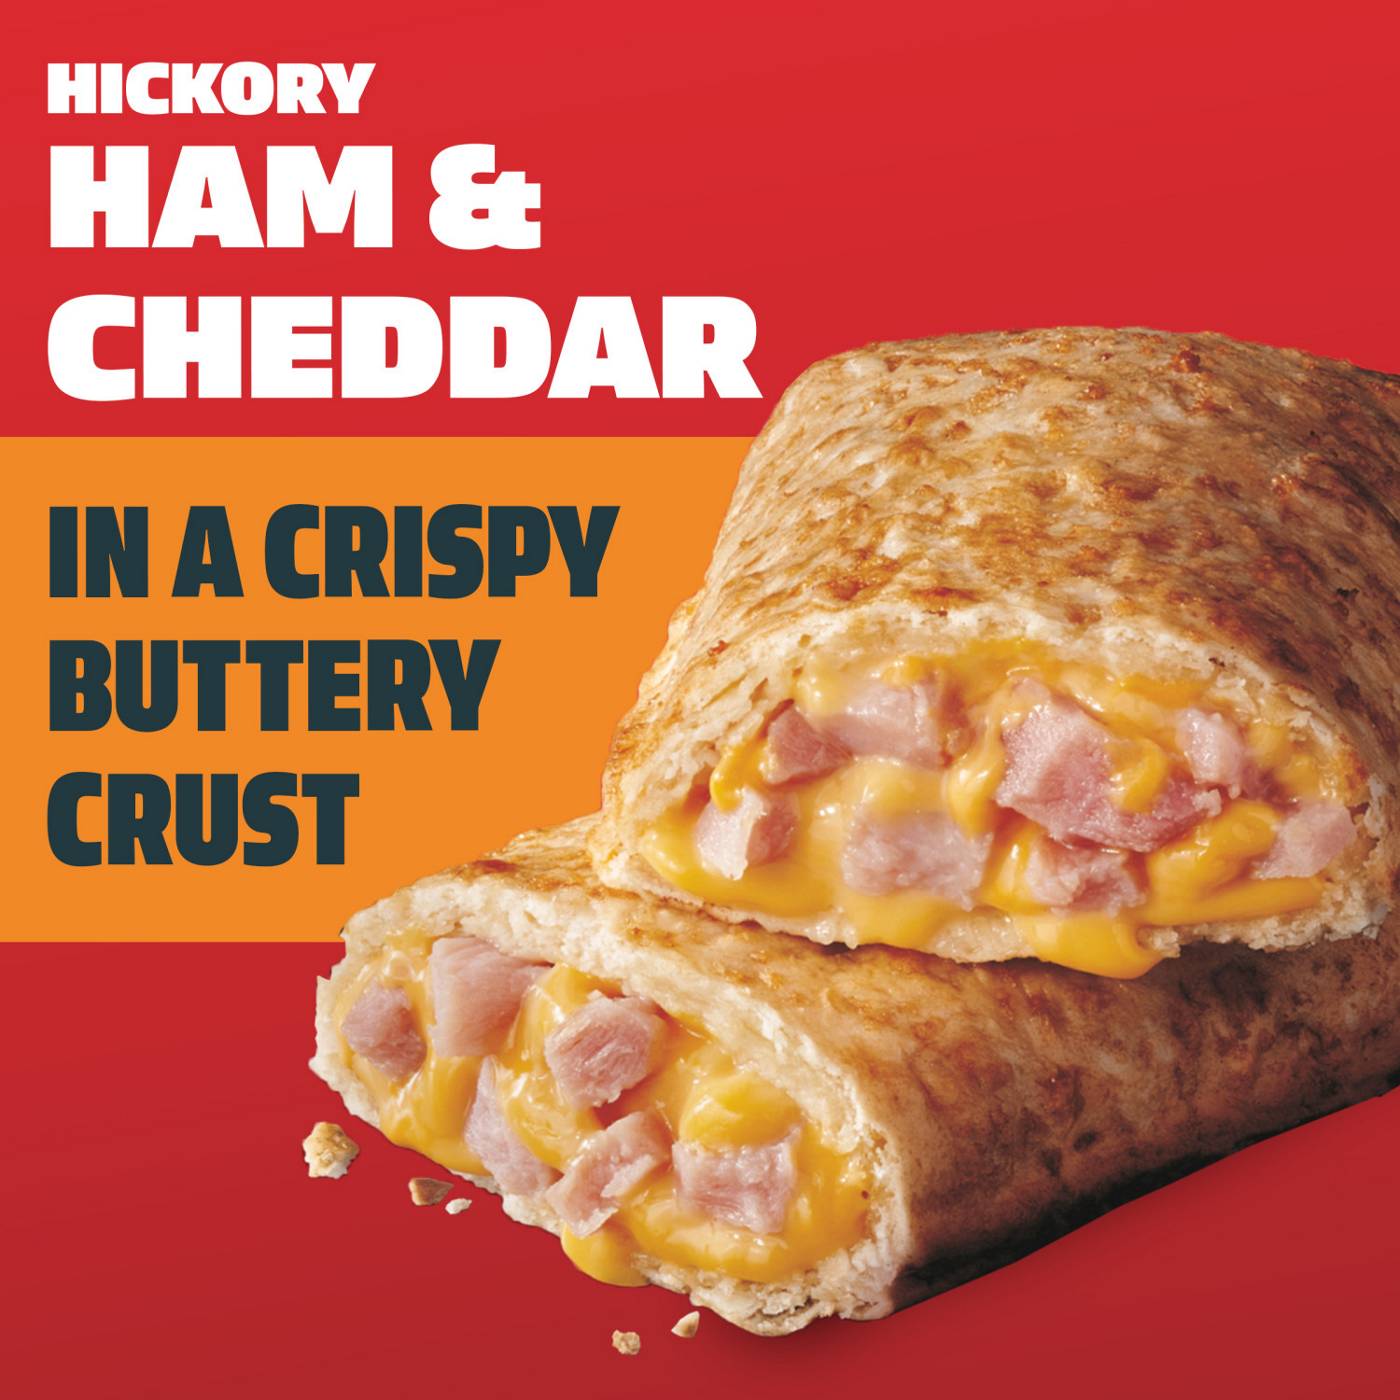 Hot Pockets Hickory Ham & Cheddar Frozen Sandwiches - Crispy Buttery Crust; image 4 of 5